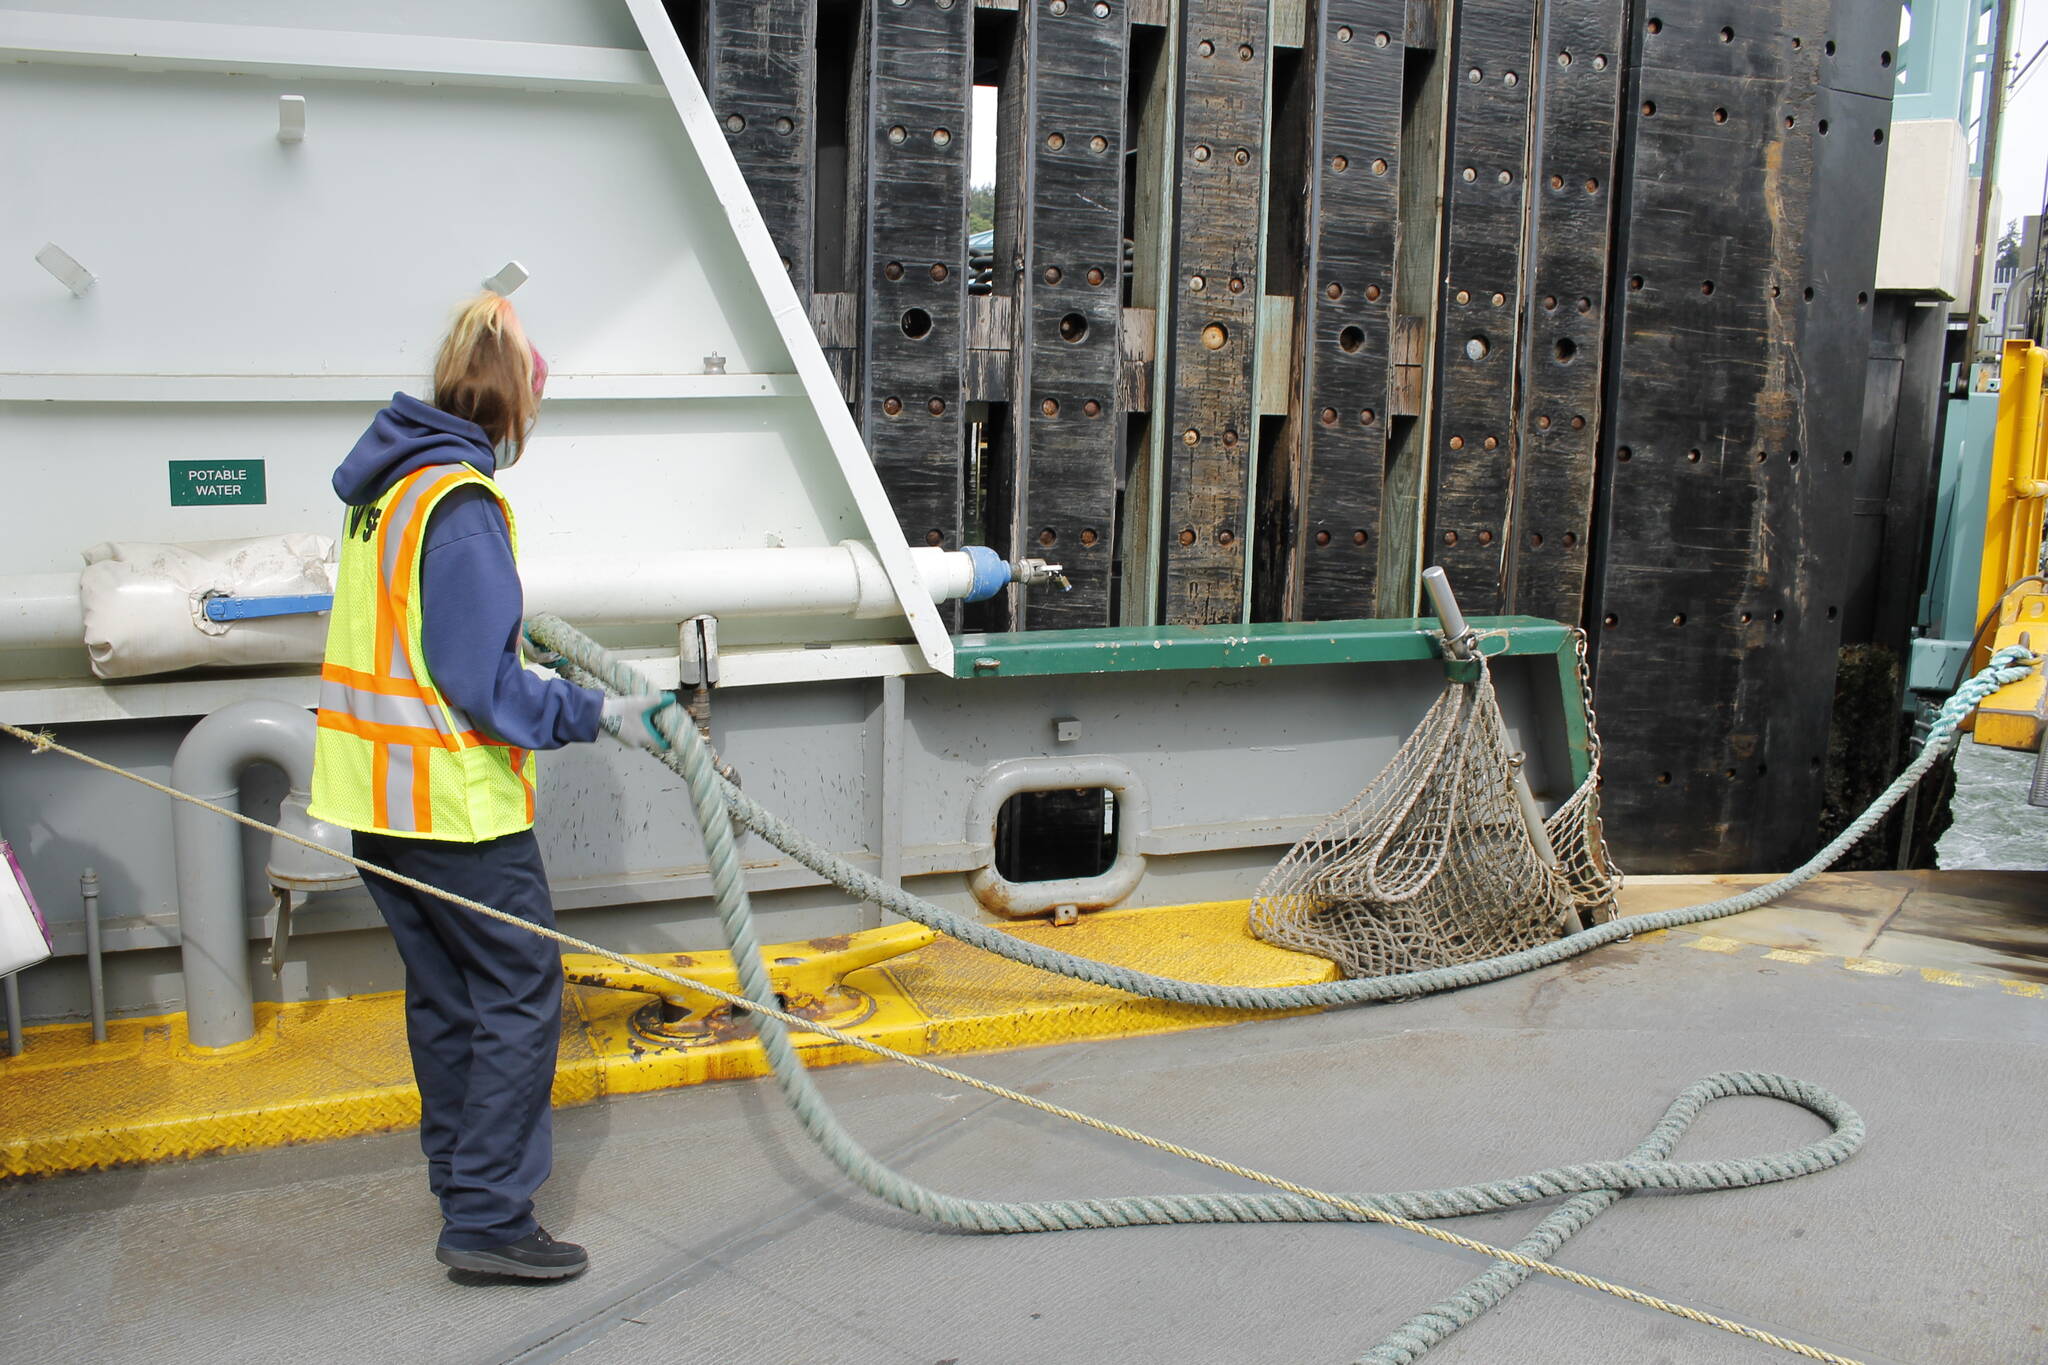 Photo by Kira Erickson/South Whidbey Record
A ferry worker ties up a vessel at the Clinton terminal.